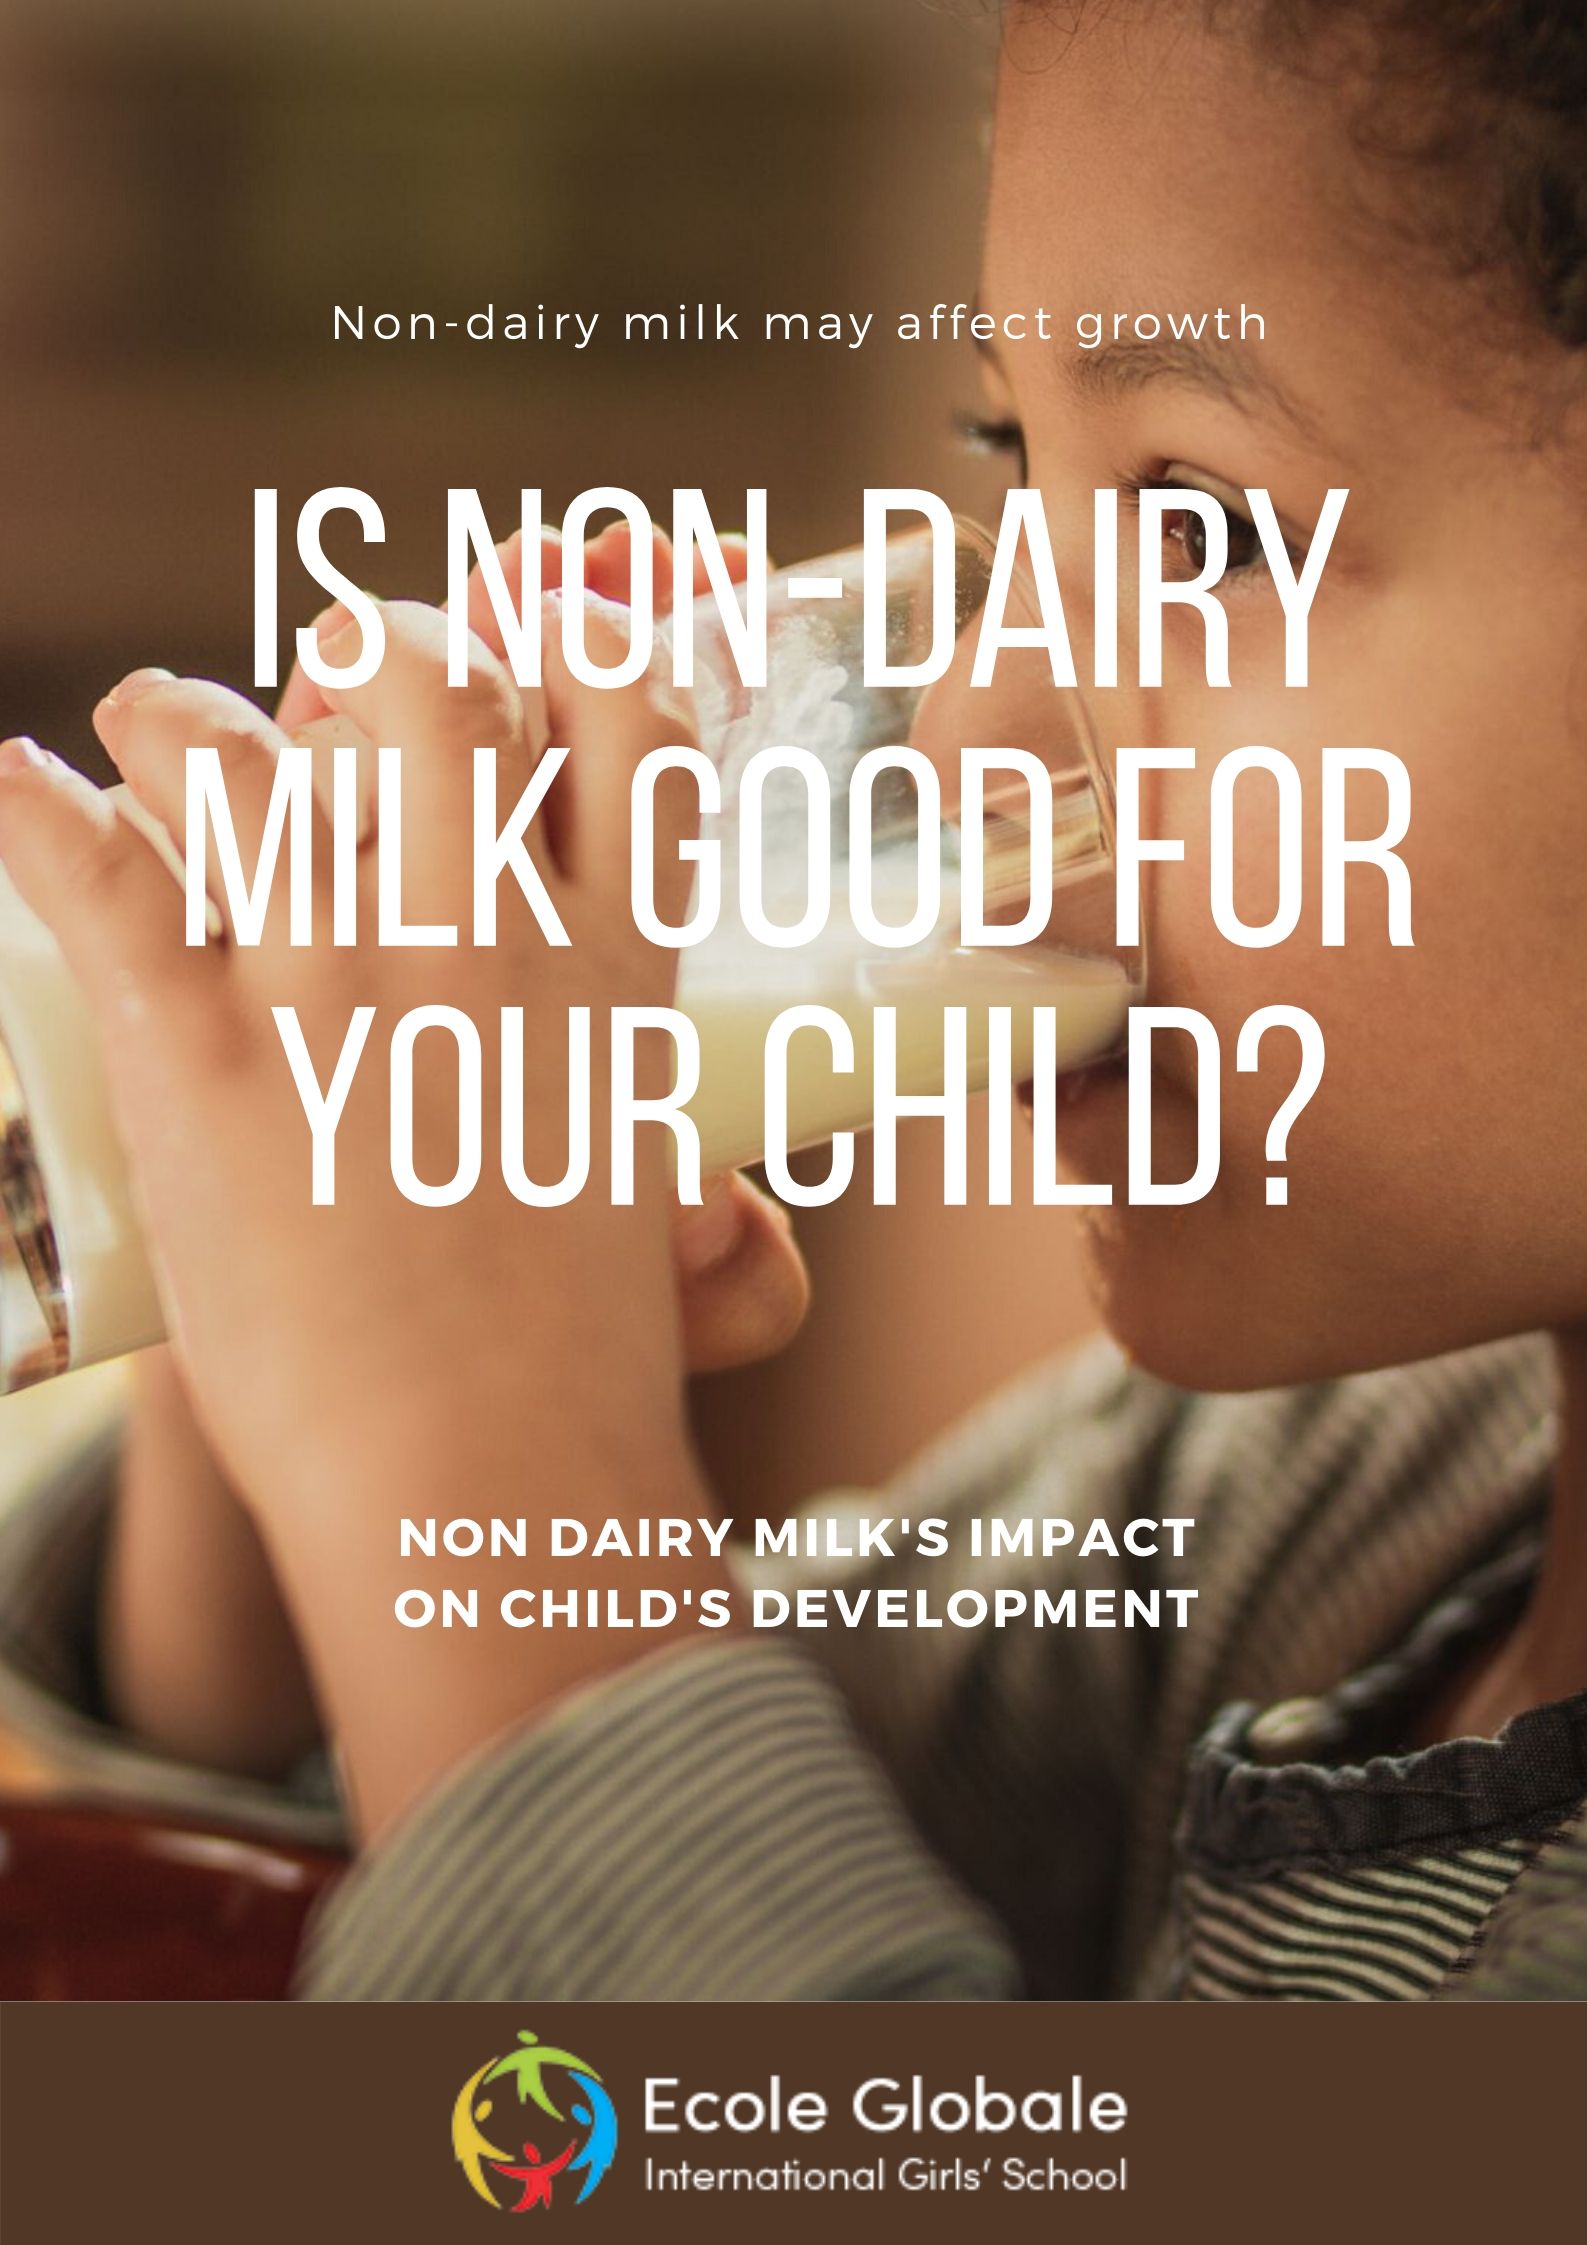 Is non-dairy milk good for your child?